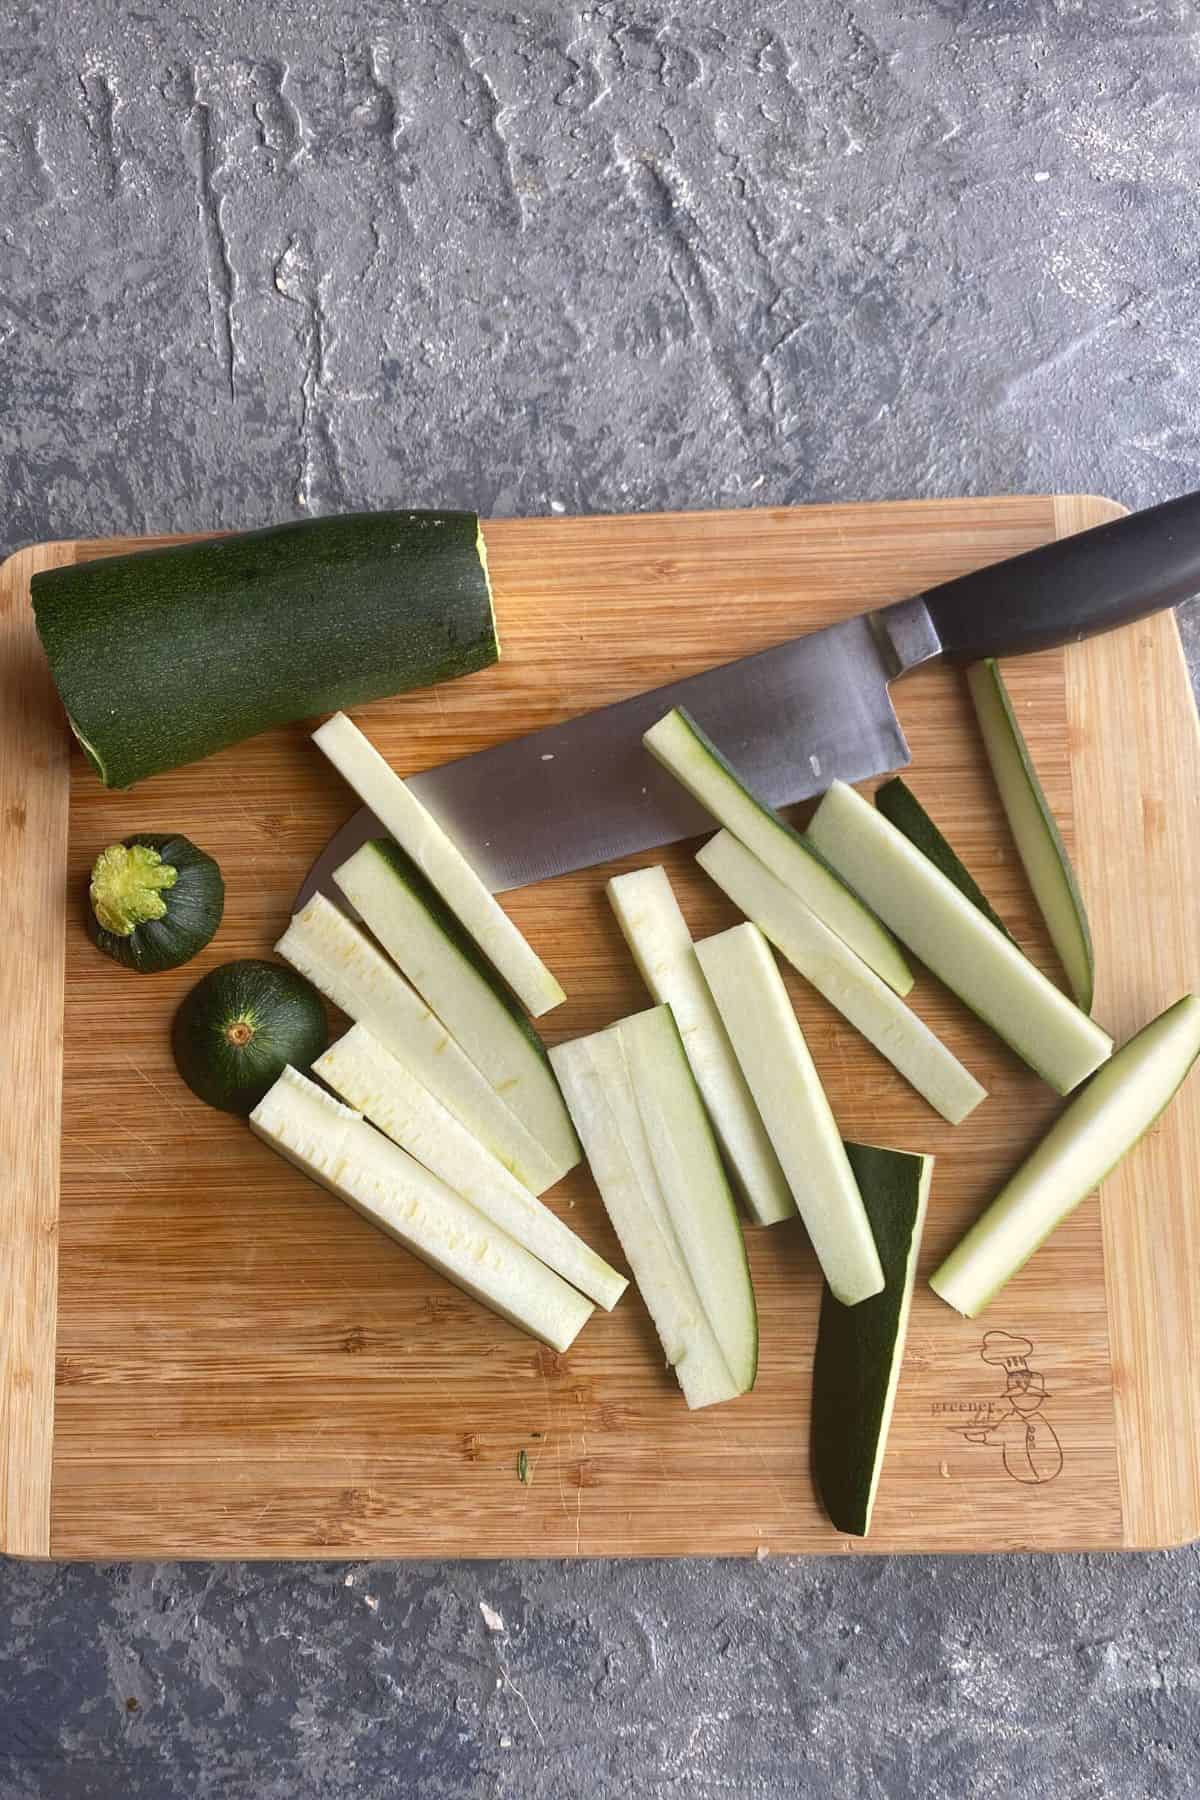 Zucchini being cut into fries on a cutting board